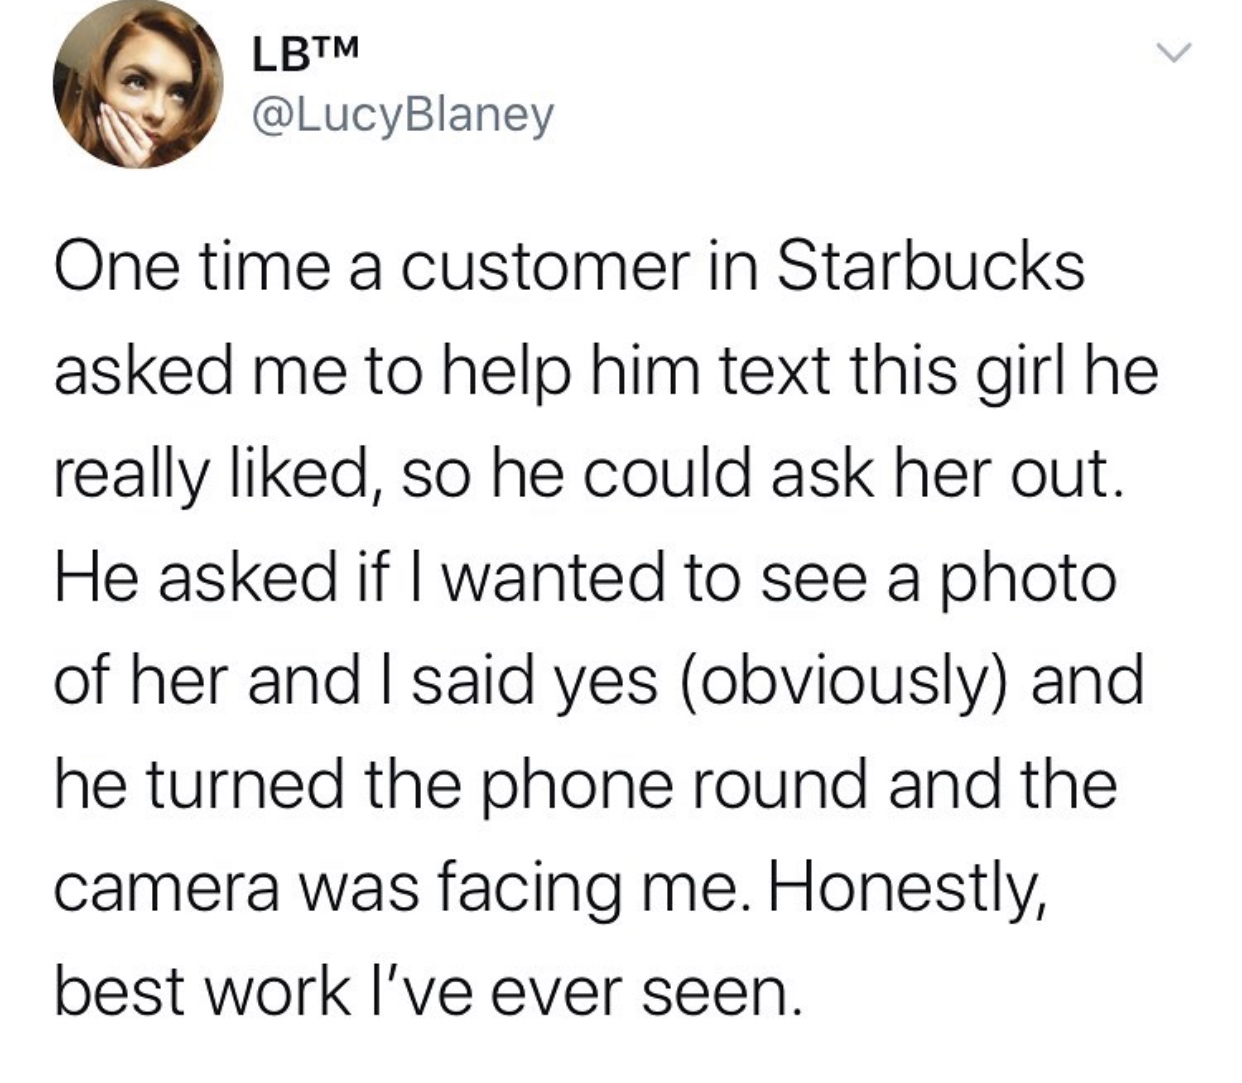 angle - Lbtm One time a customer in Starbucks asked me to help him text this girl he really d, so he could ask her out. He asked if I wanted to see a photo of her and I said yes obviously and he turned the phone round and the camera was facing me. Honestl